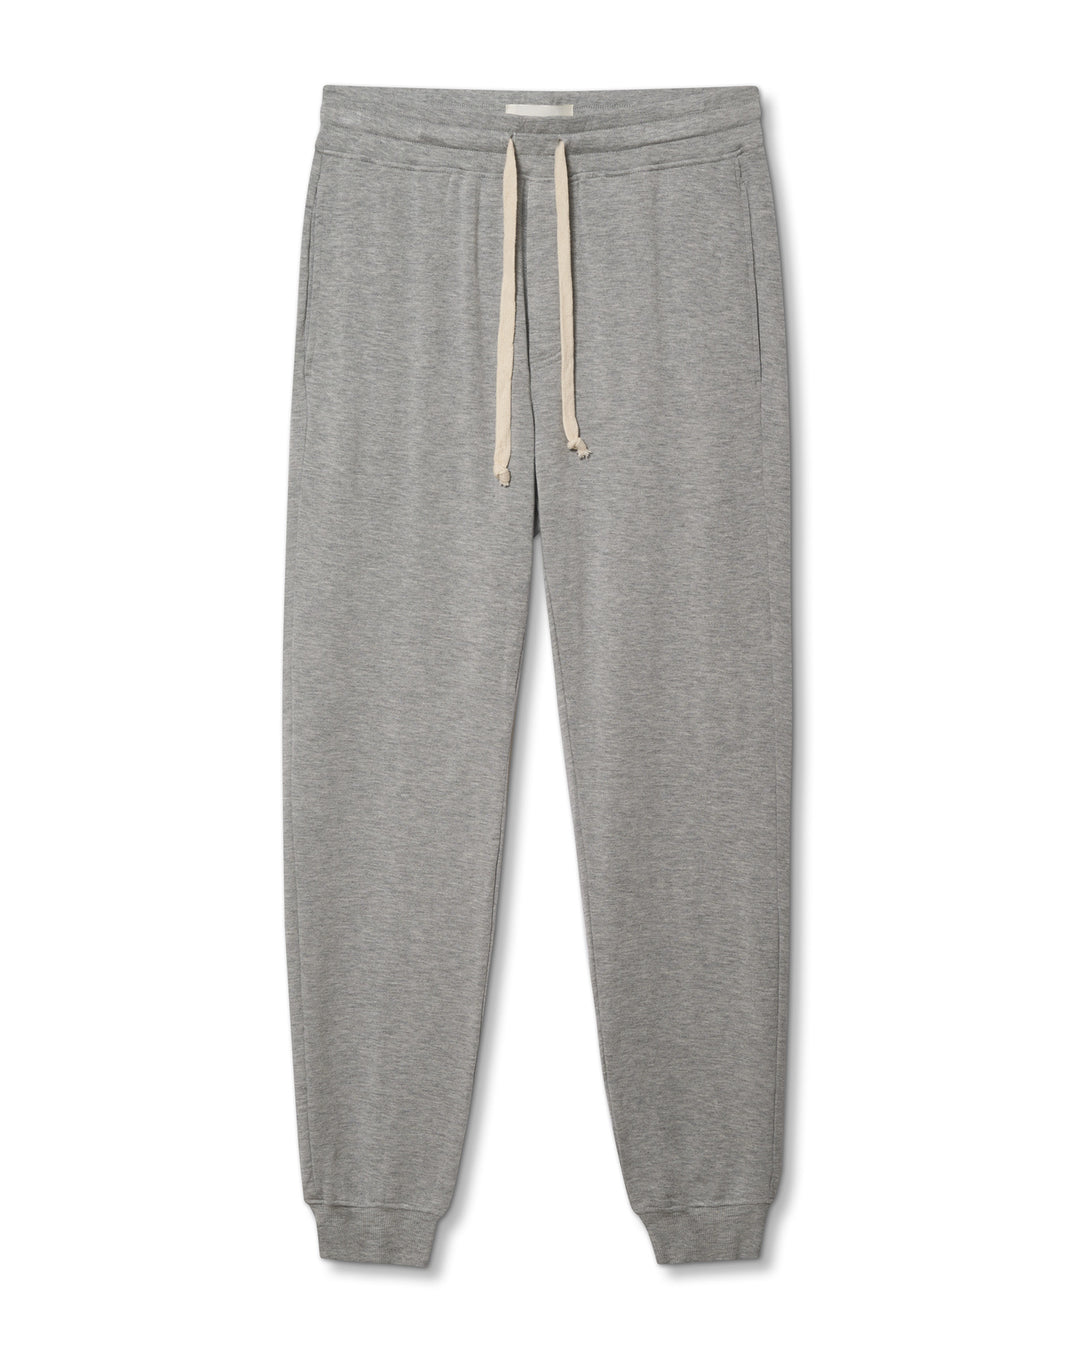 San Diego Sweatpants – The WHEAT Collection